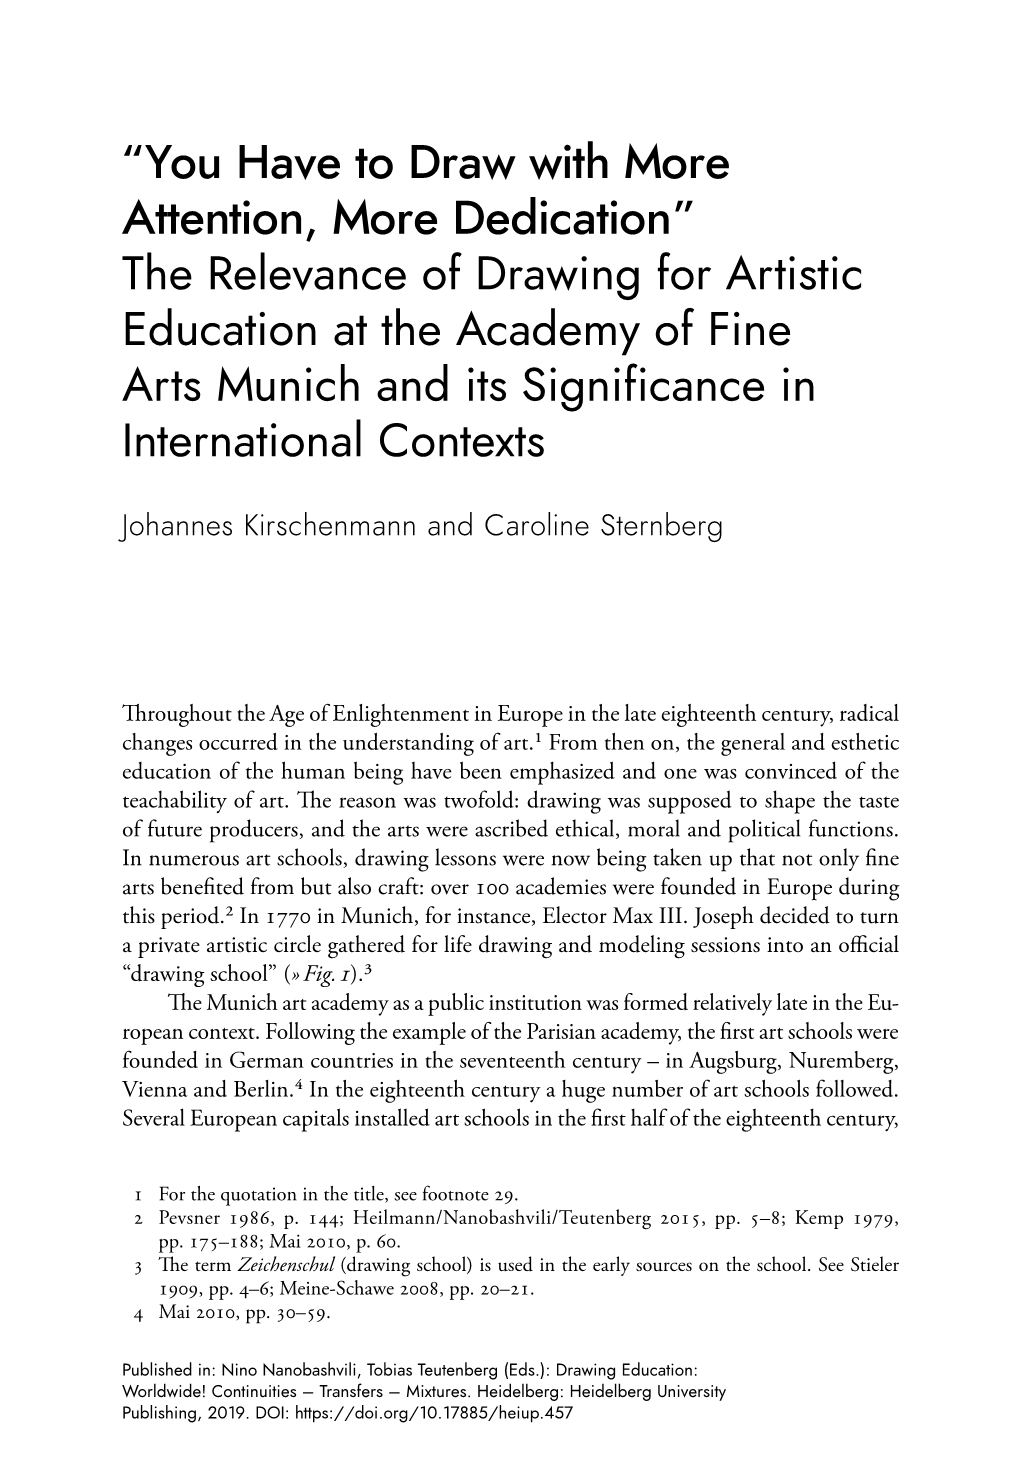 The Relevance of Drawing for Artistic Education at the Academy of Fine Arts Munich and Its Significance in International Contexts